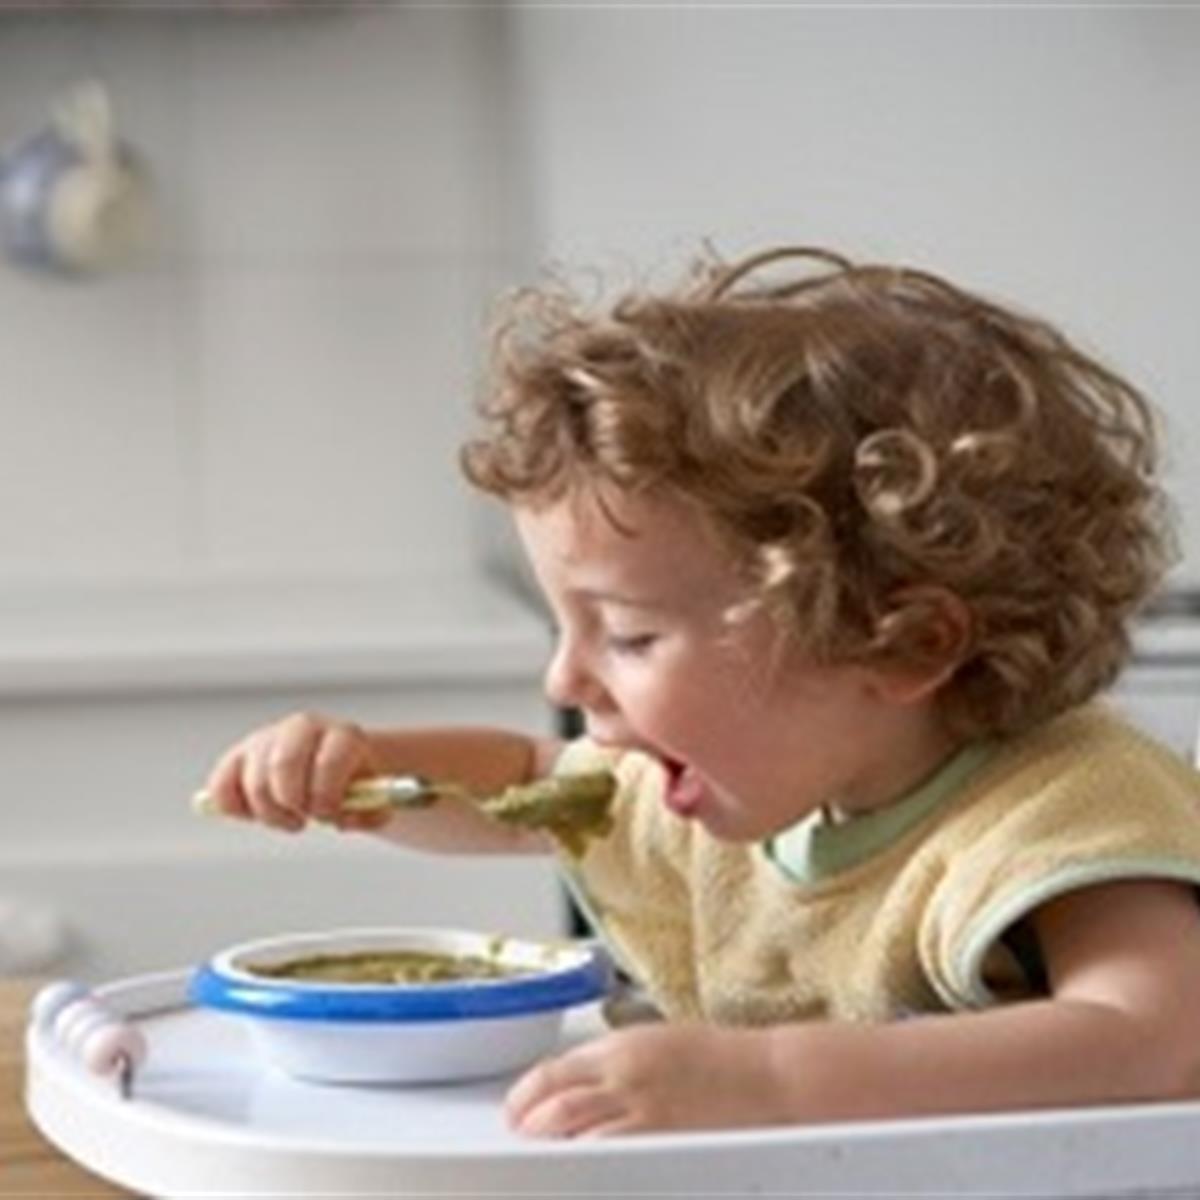 self feeding tips for toddlers